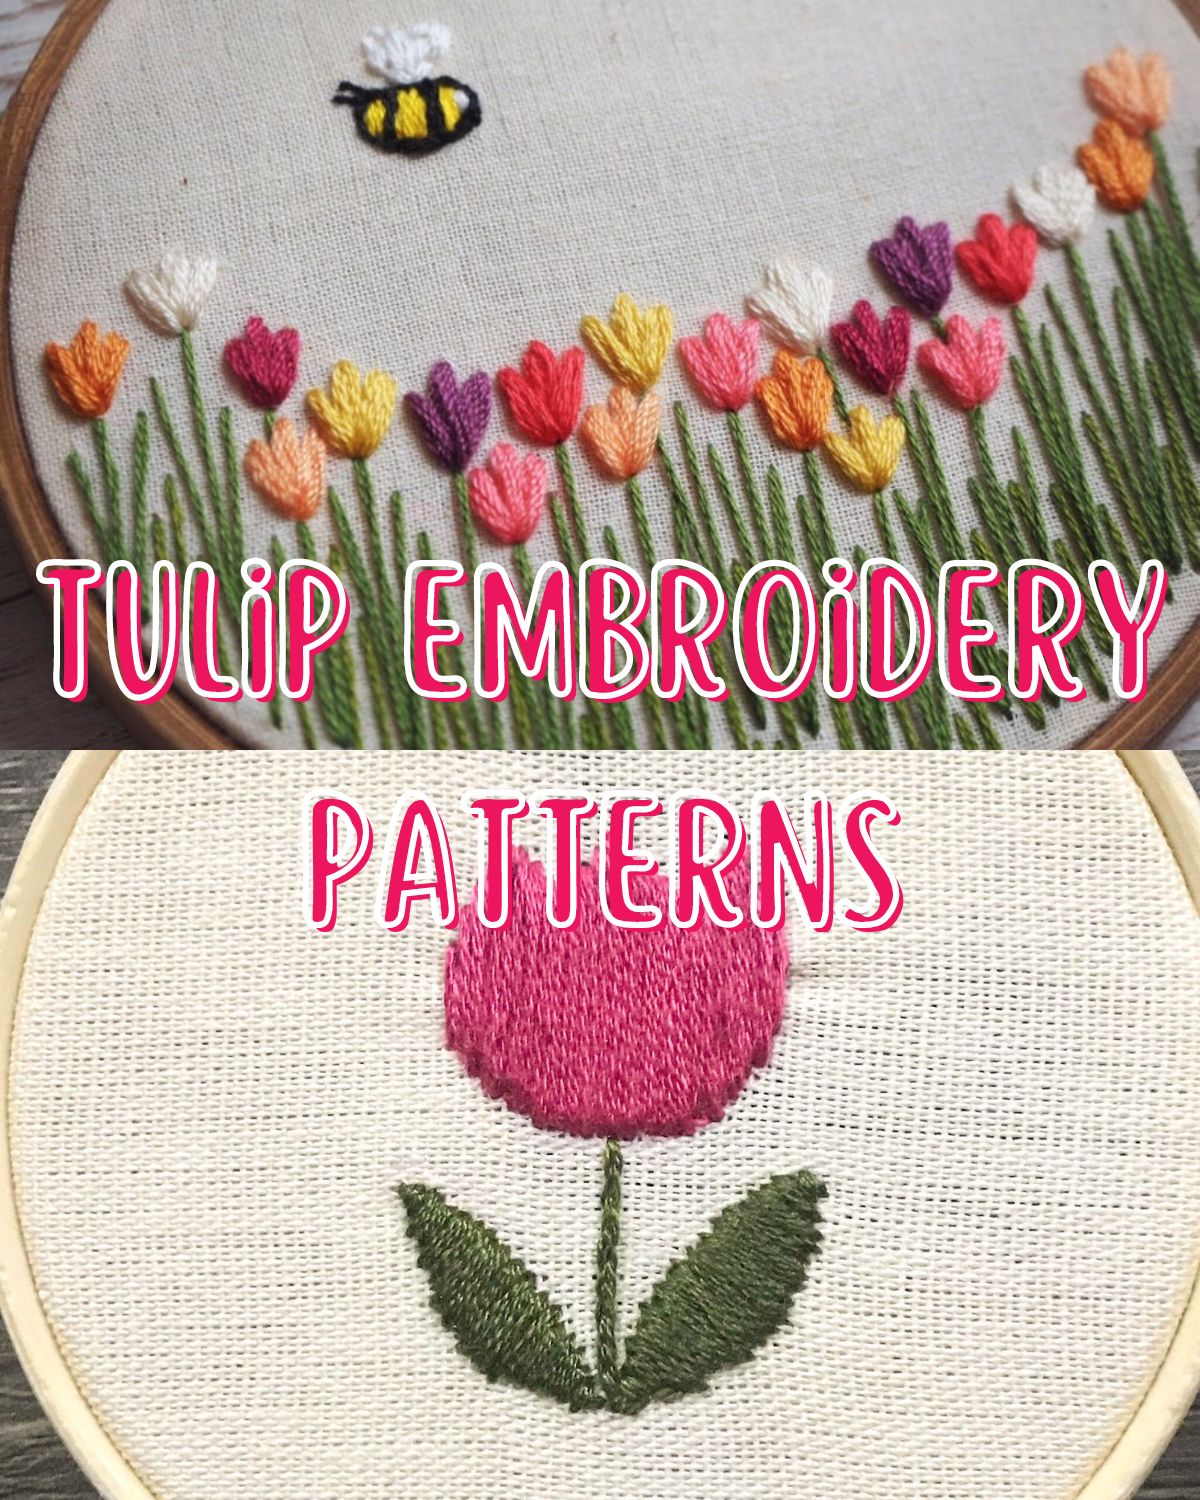 Two embroidery pieces that feature tulips 